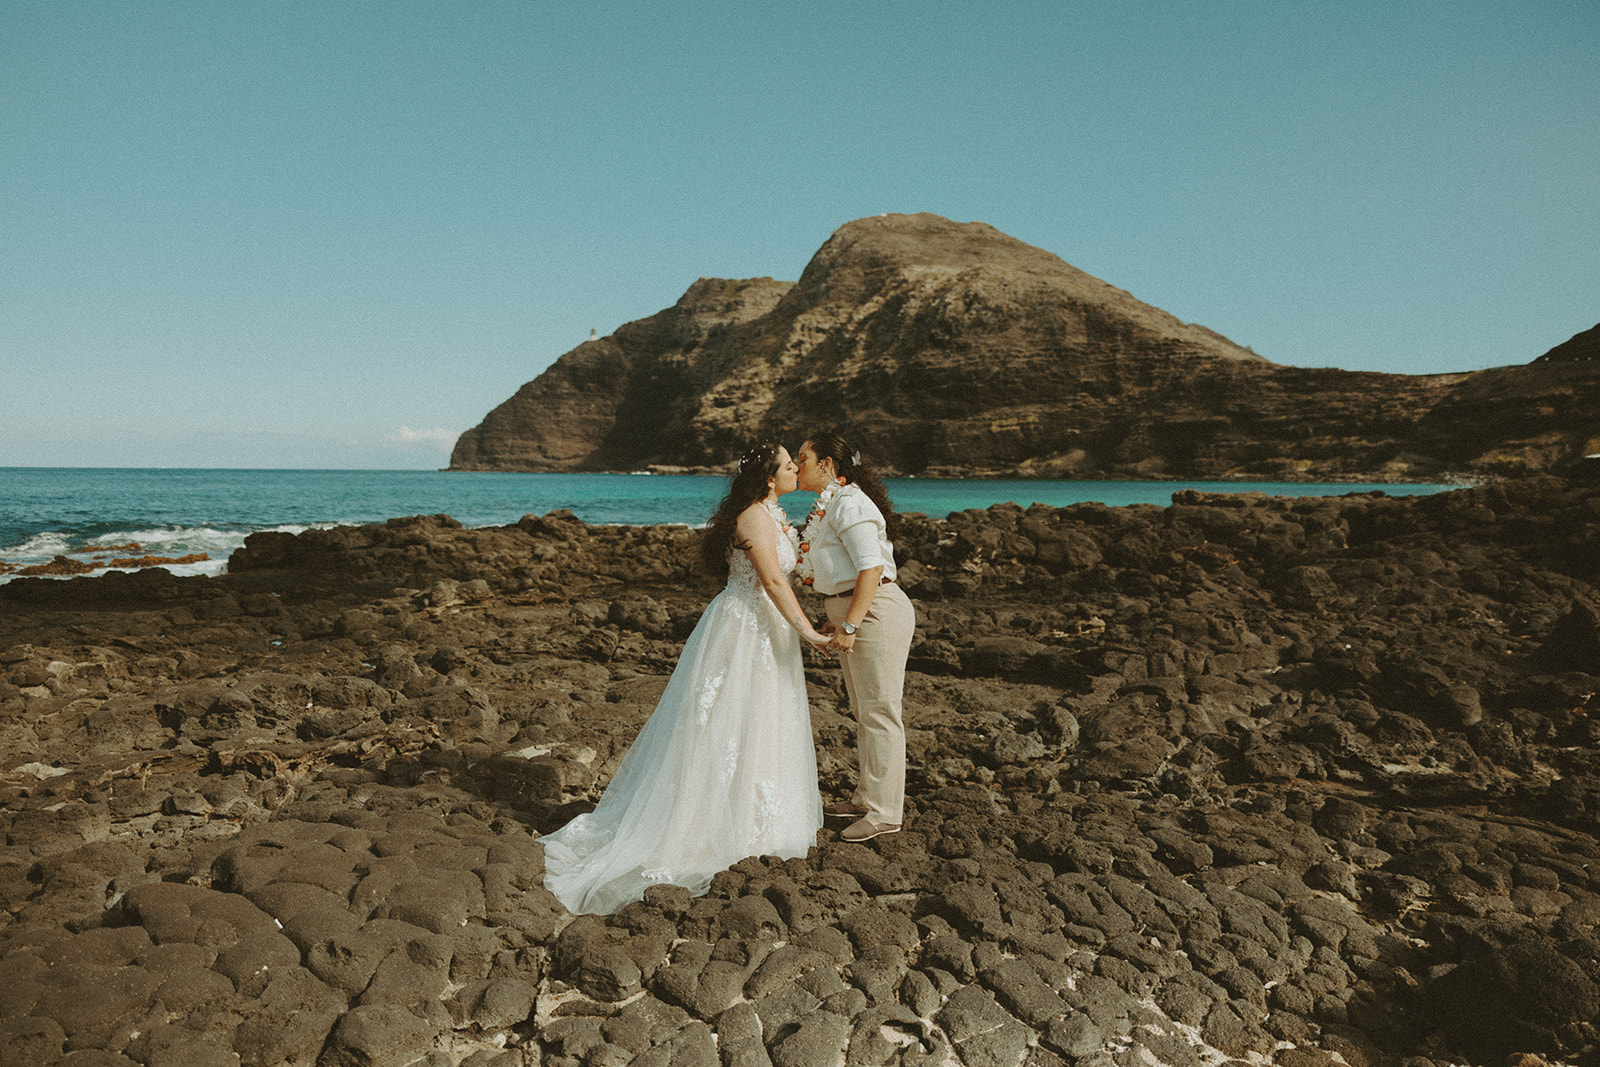 Couple posing on the beach in oahu for their wedding elopement